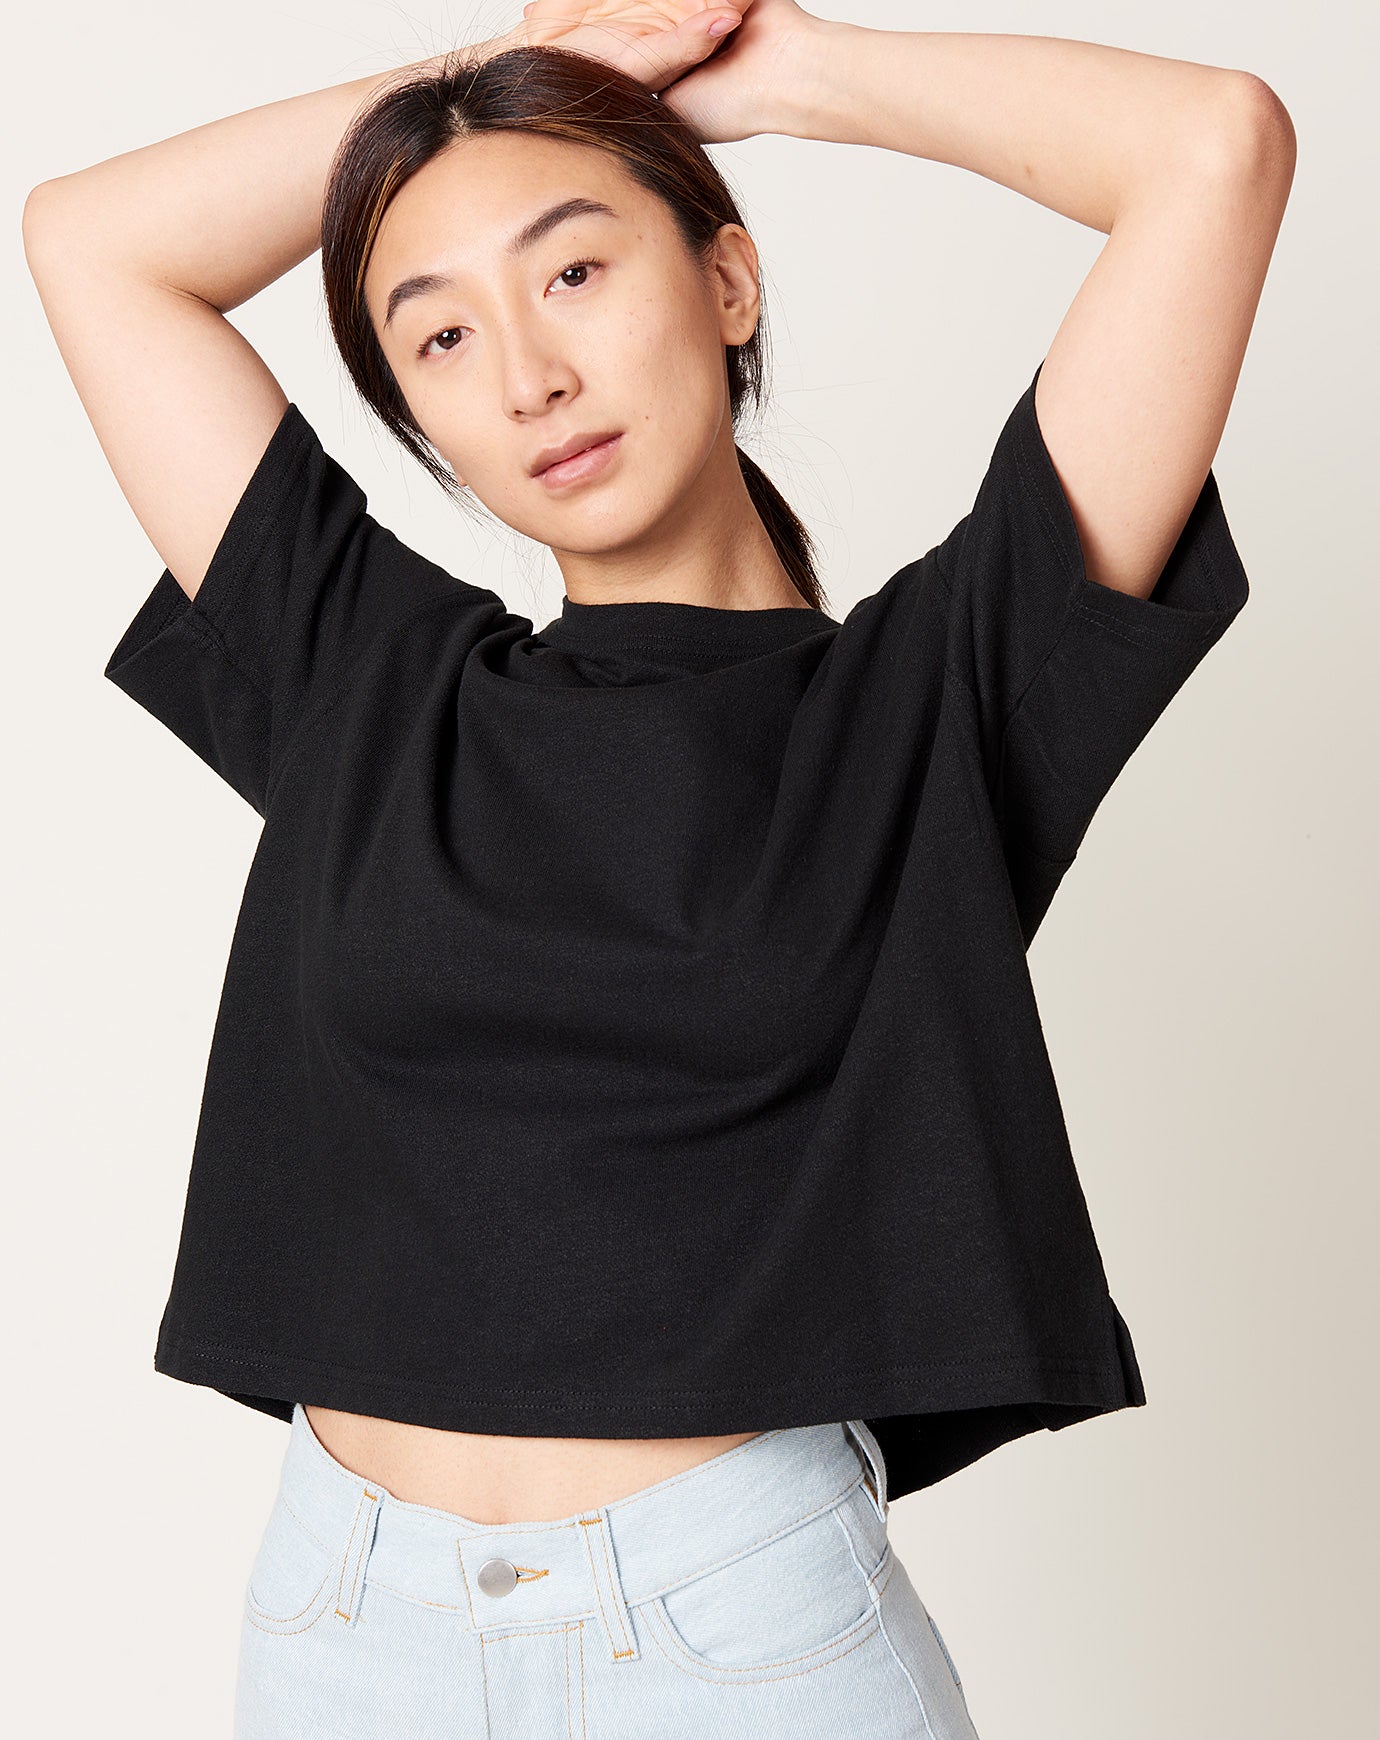 7115 by Szeki Signature Cropped Tee in Black